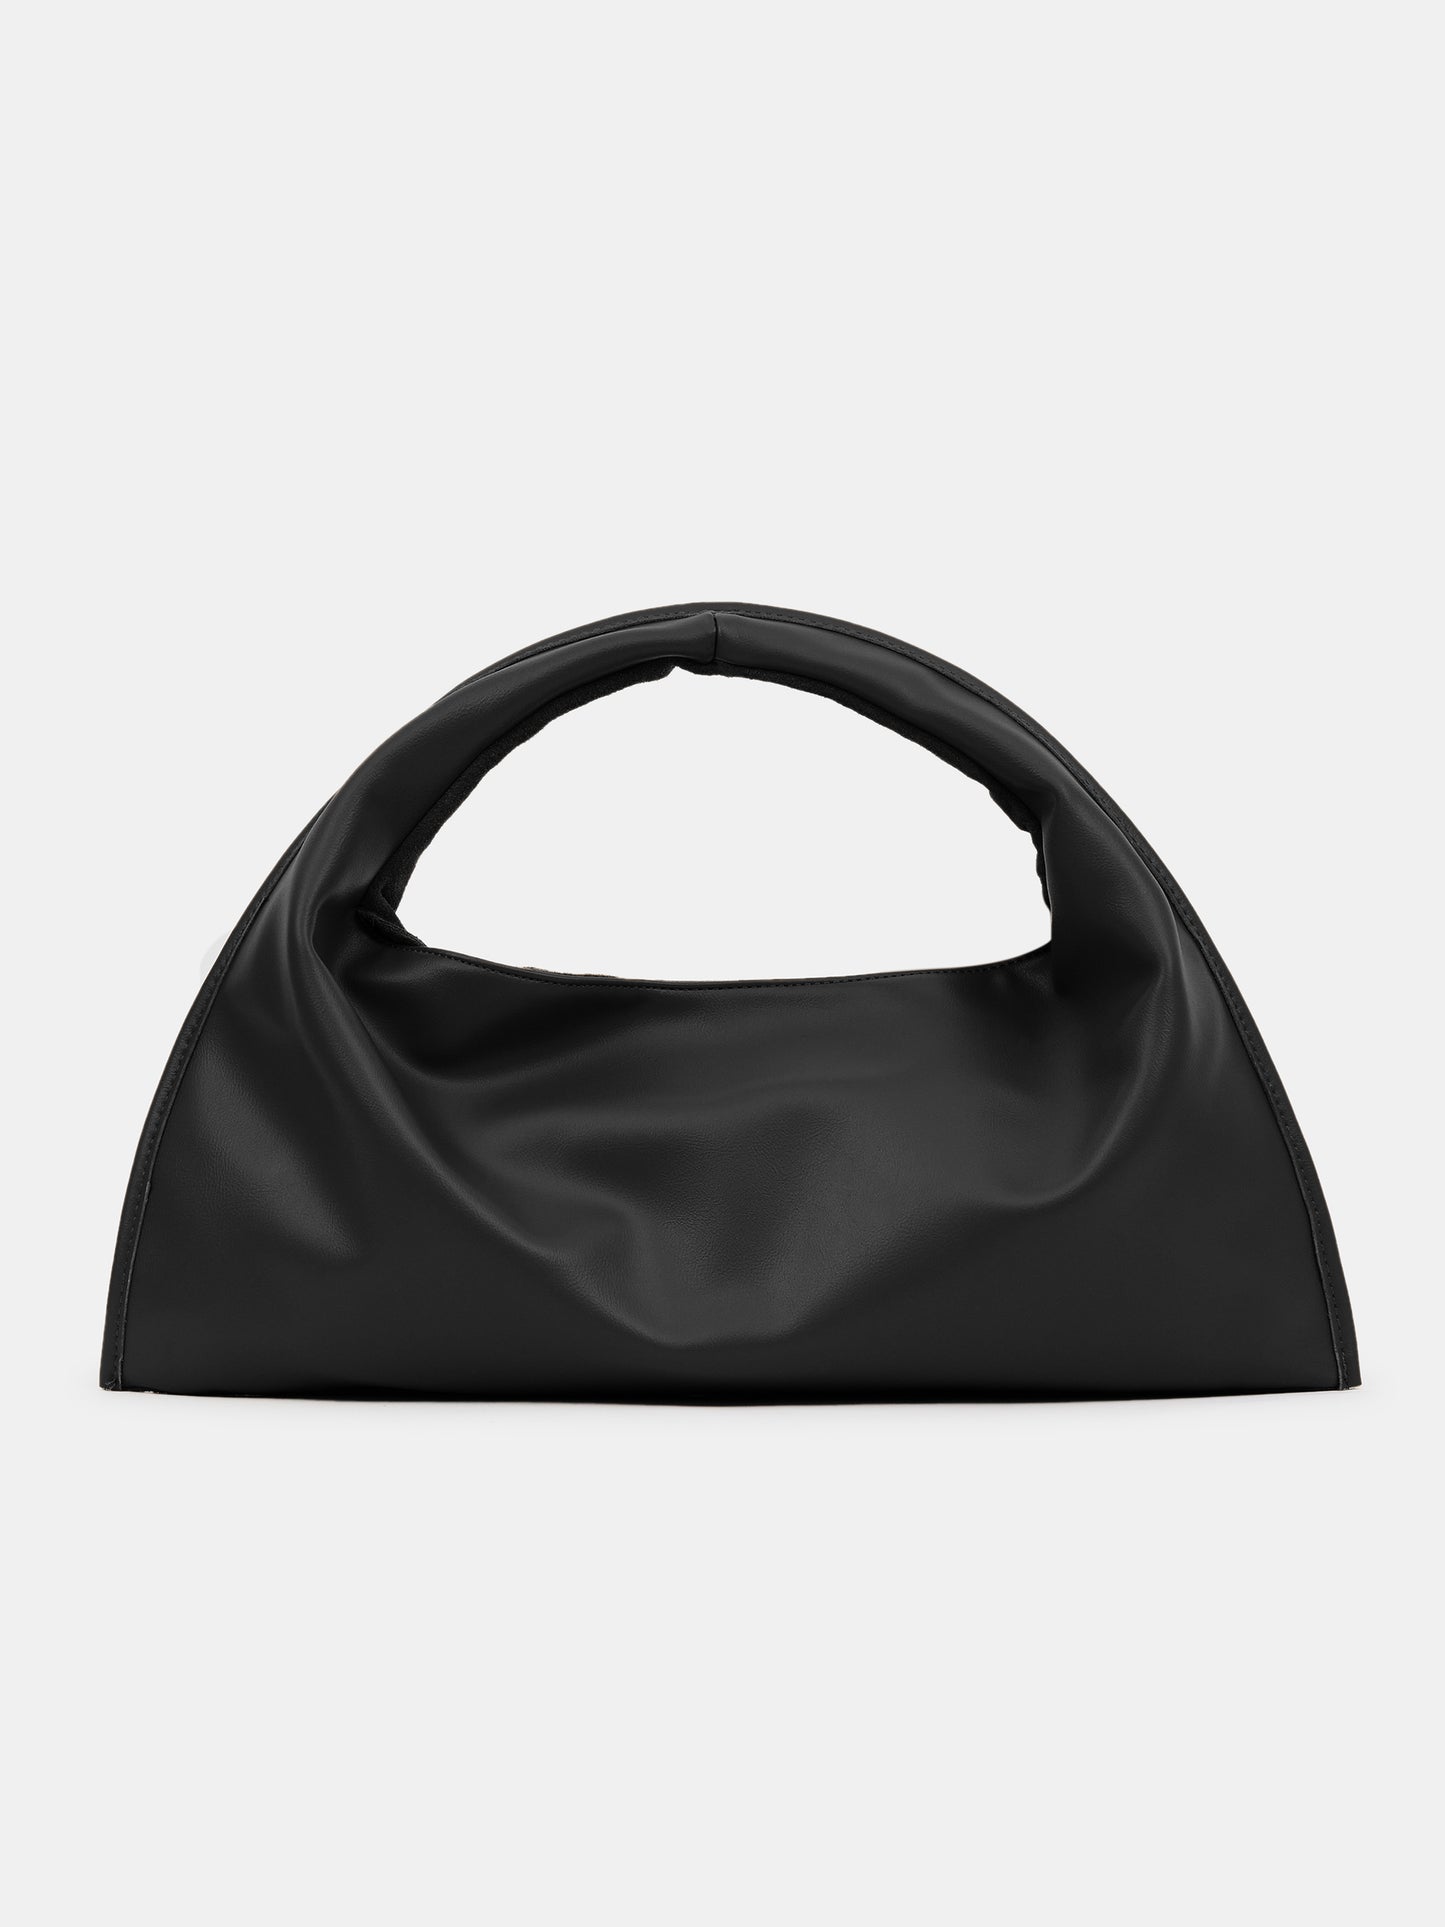 Double-Sided Tote Bag, Black/Black Suede